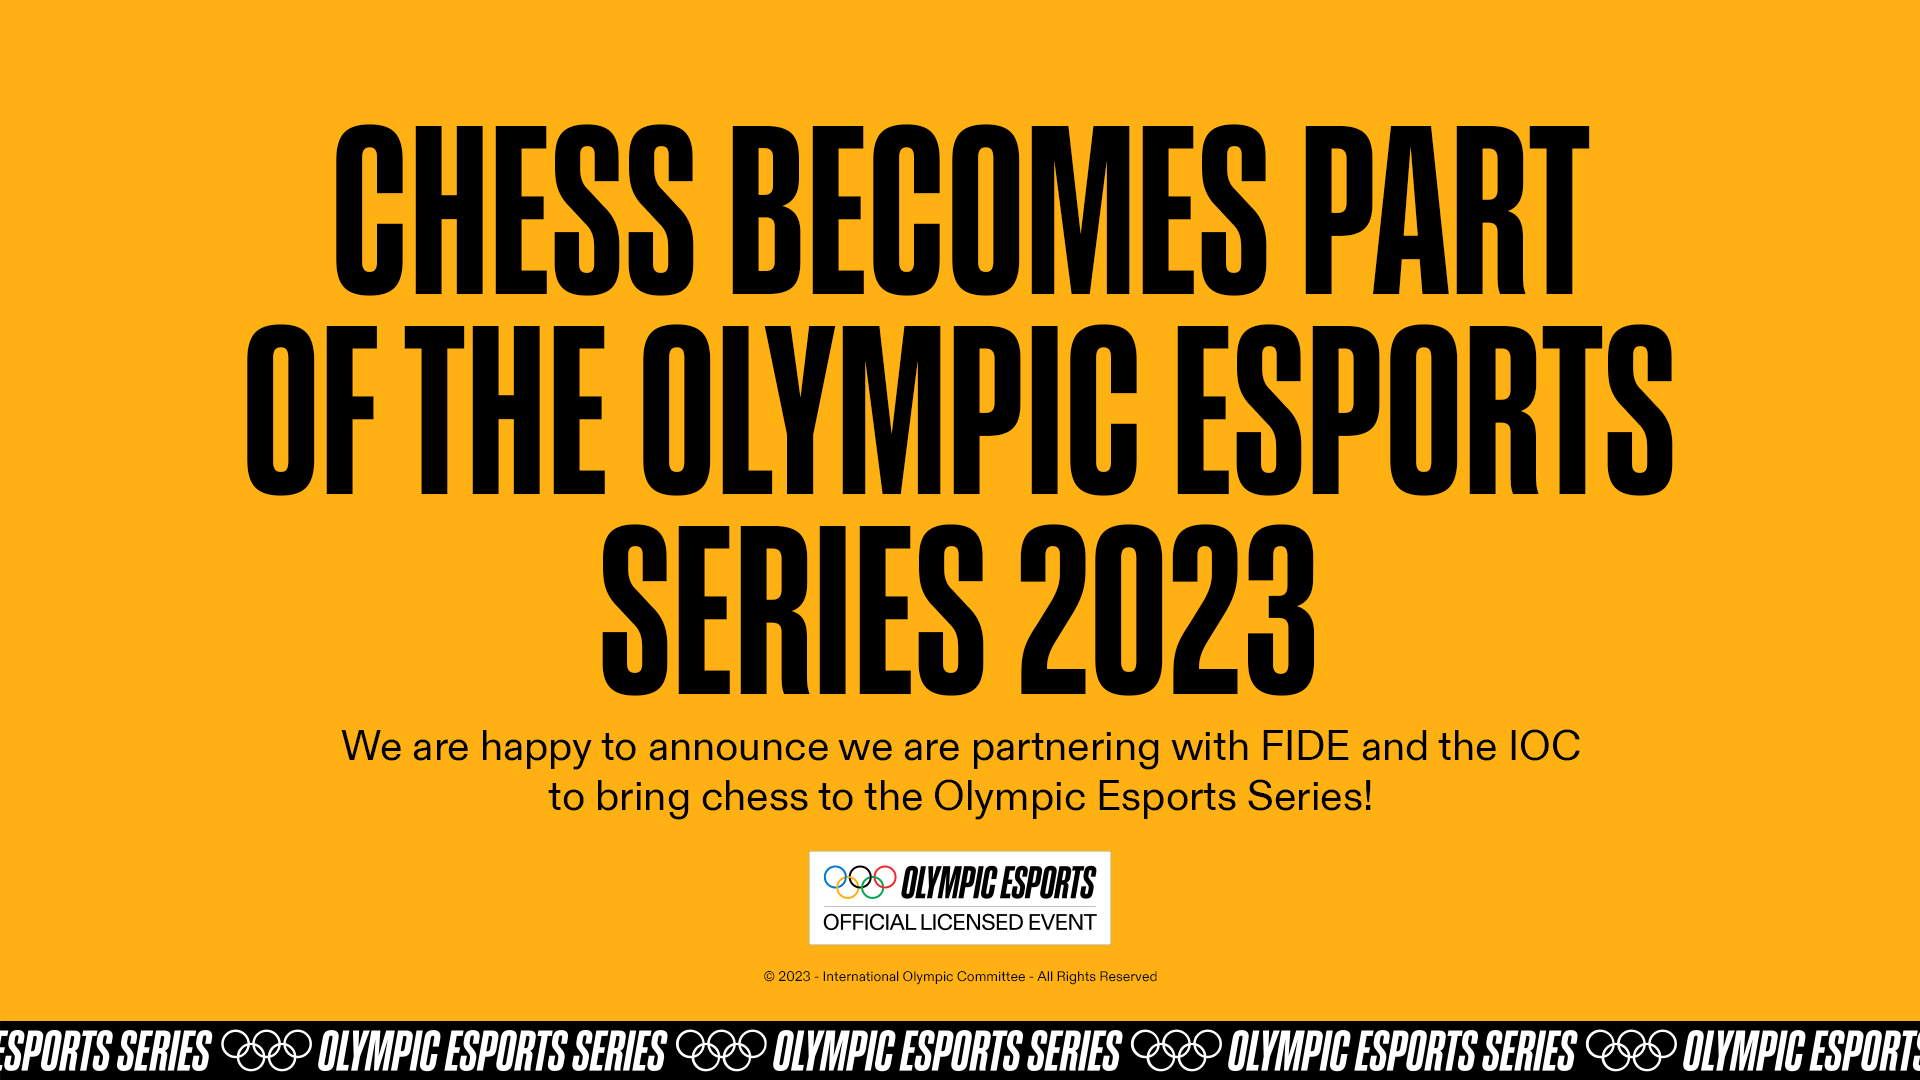 Chess.com And FIDE Bring Chess To The Olympic Esports Series